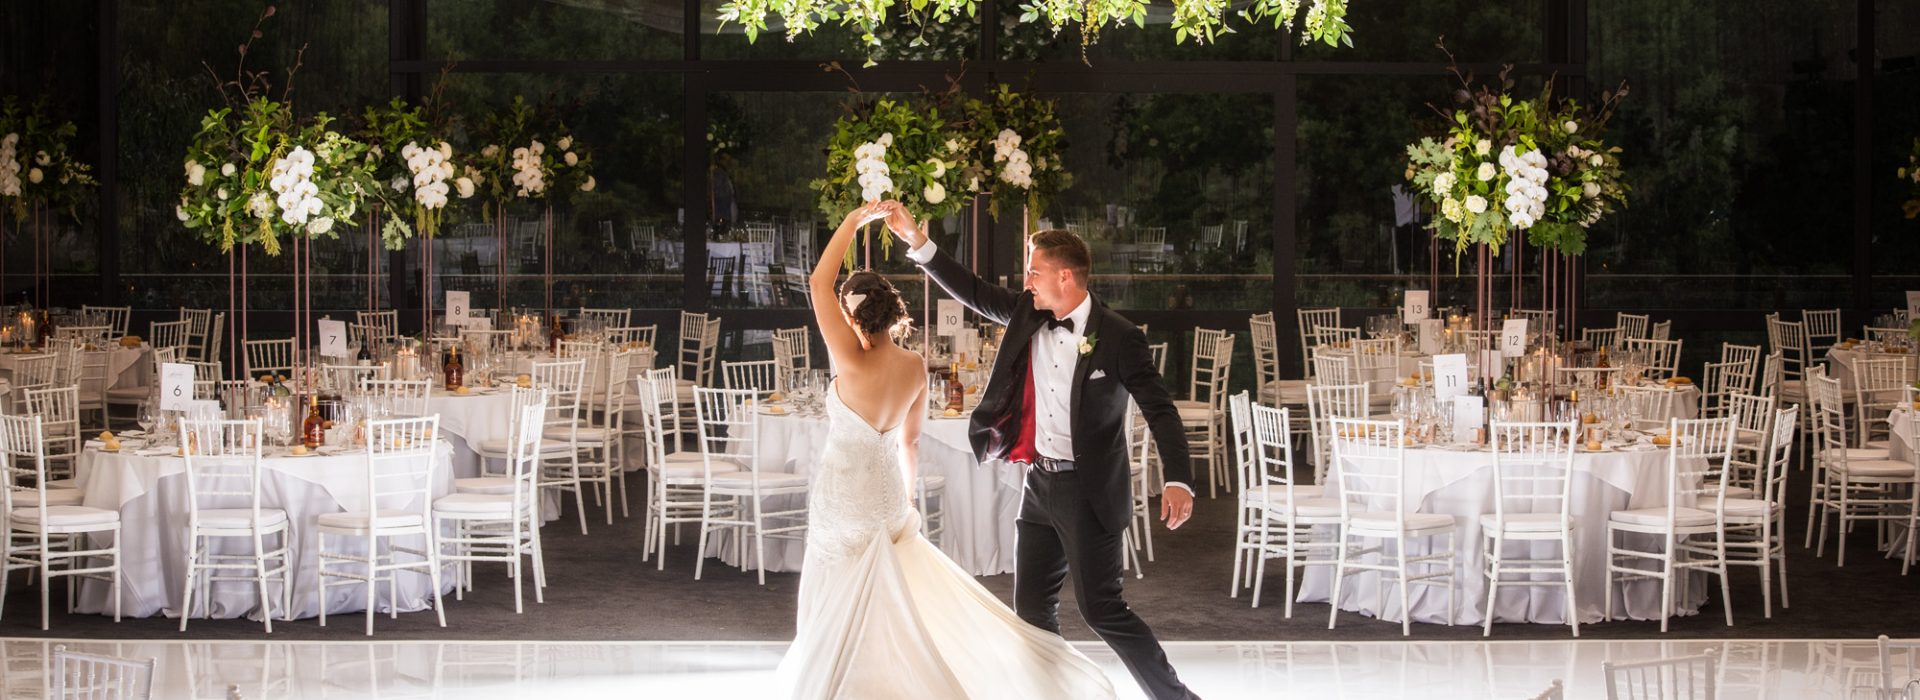 A beautiful bride and groom dancing in a grand room with elegant white chandeliers - a magical moment at a Melbourne wedding venue.